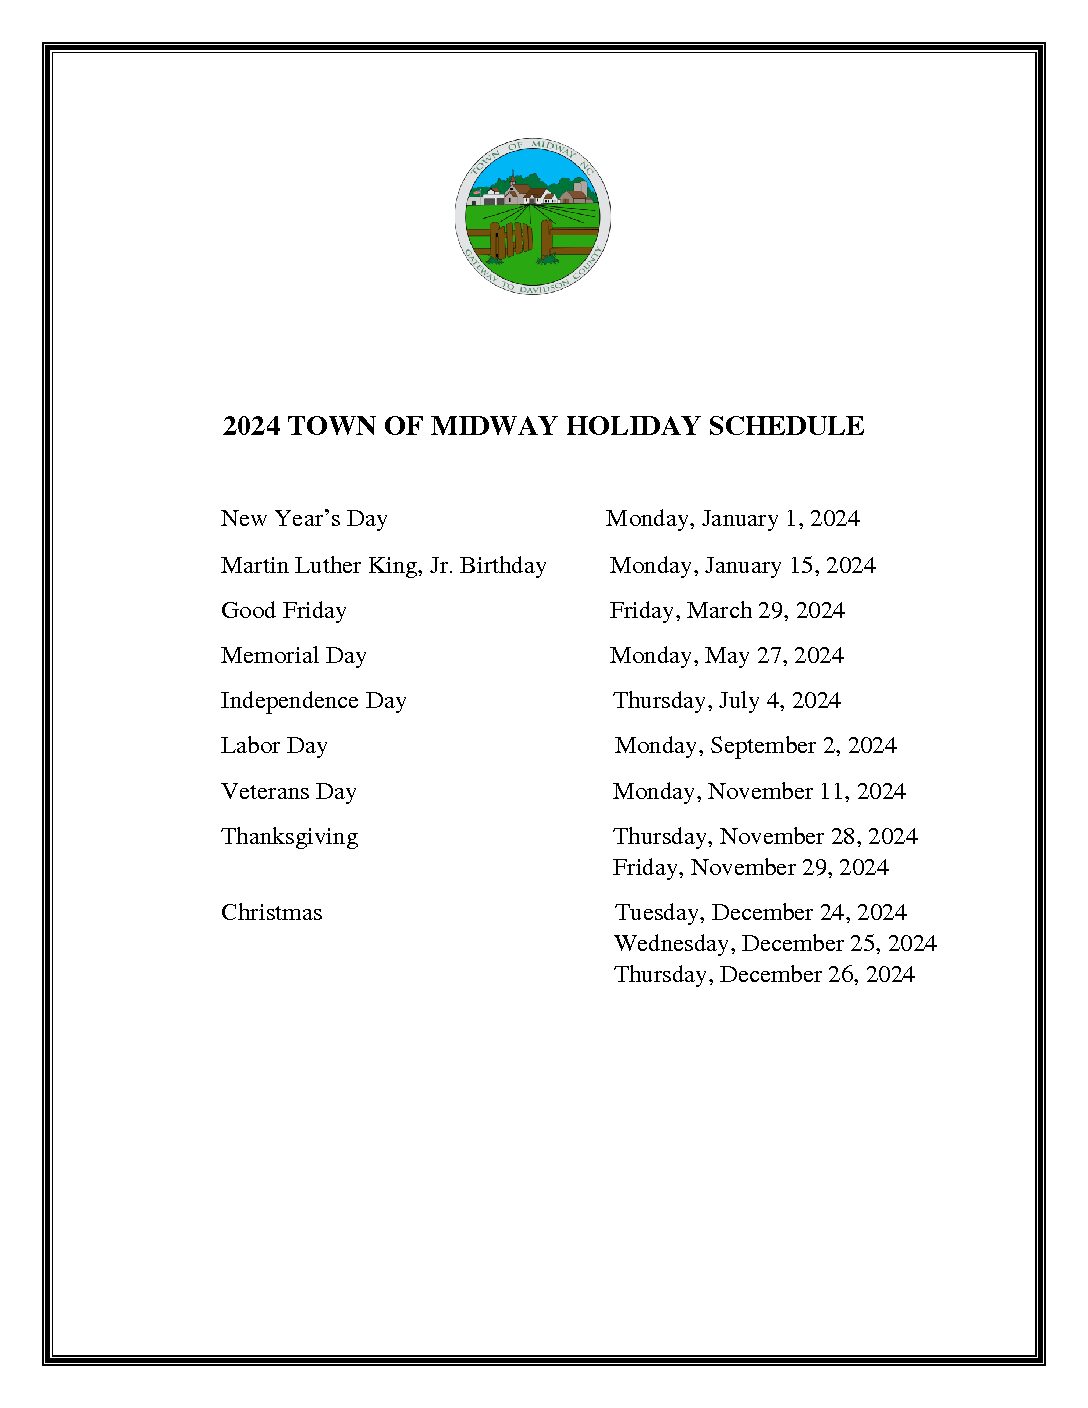 HOLIDAY SCHEDULE 2024 Town of Midway, NC